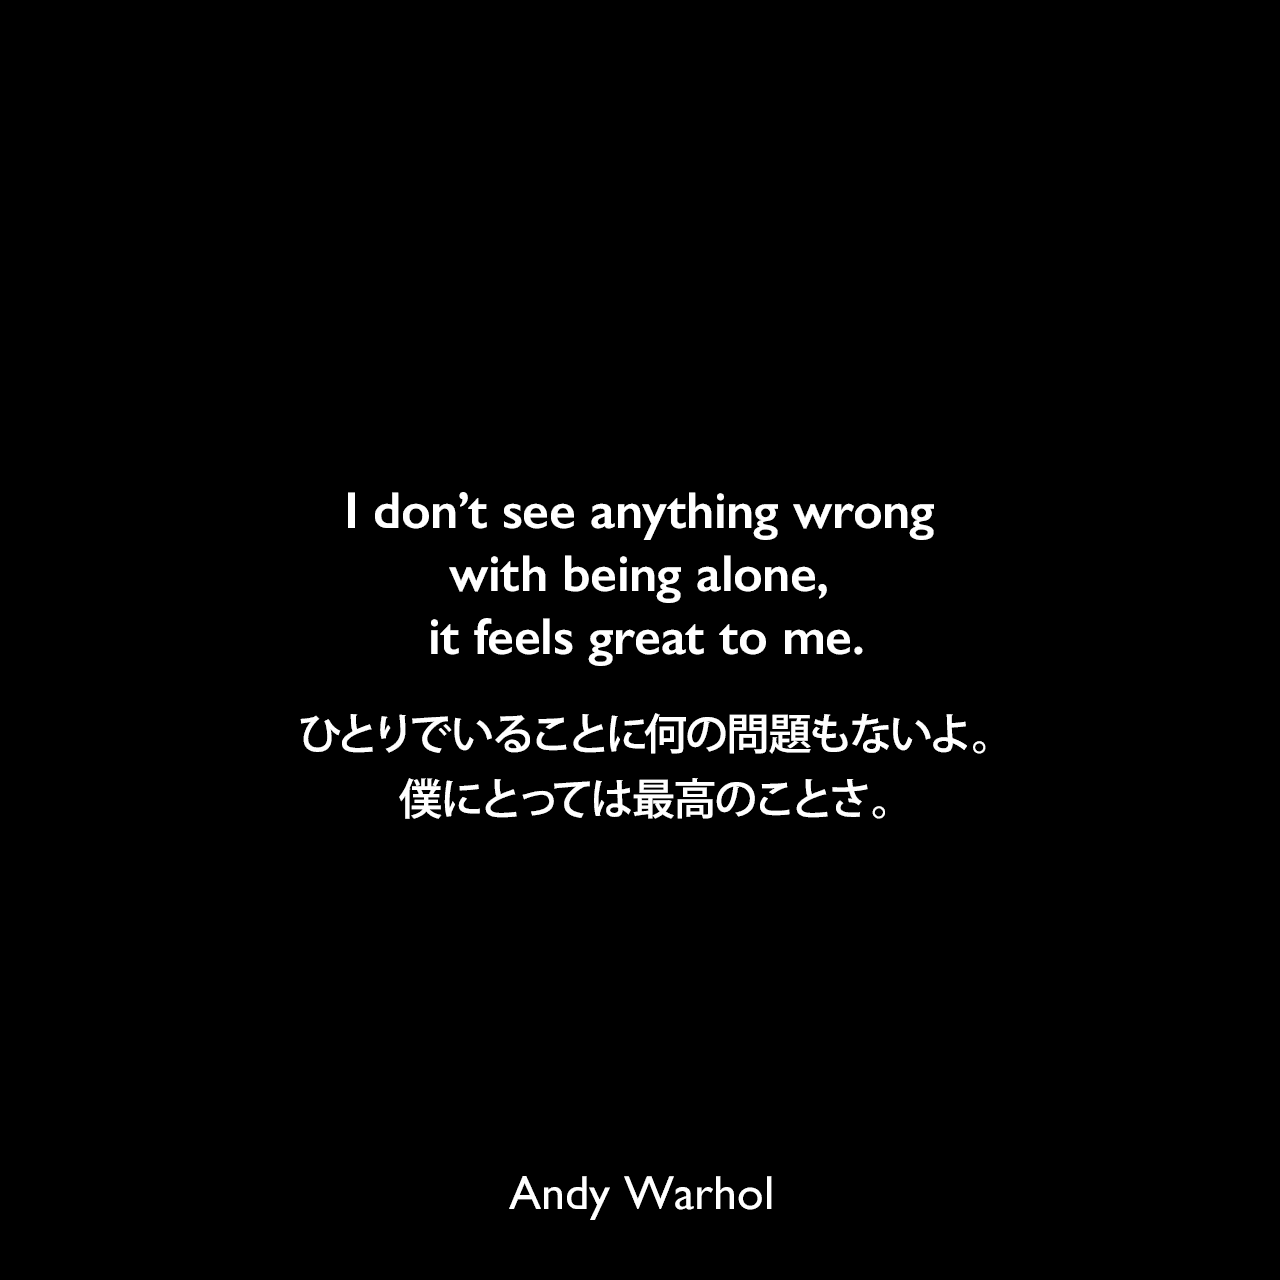 I don’t see anything wrong with being alone, it feels great to me.ひとりでいることに何の問題もないよ。僕にとっては最高のことさ。- アンディ・ウォーホルによる本「ぼくの哲学（The Philosophy of Andy Warhol）より」Andy Warhol